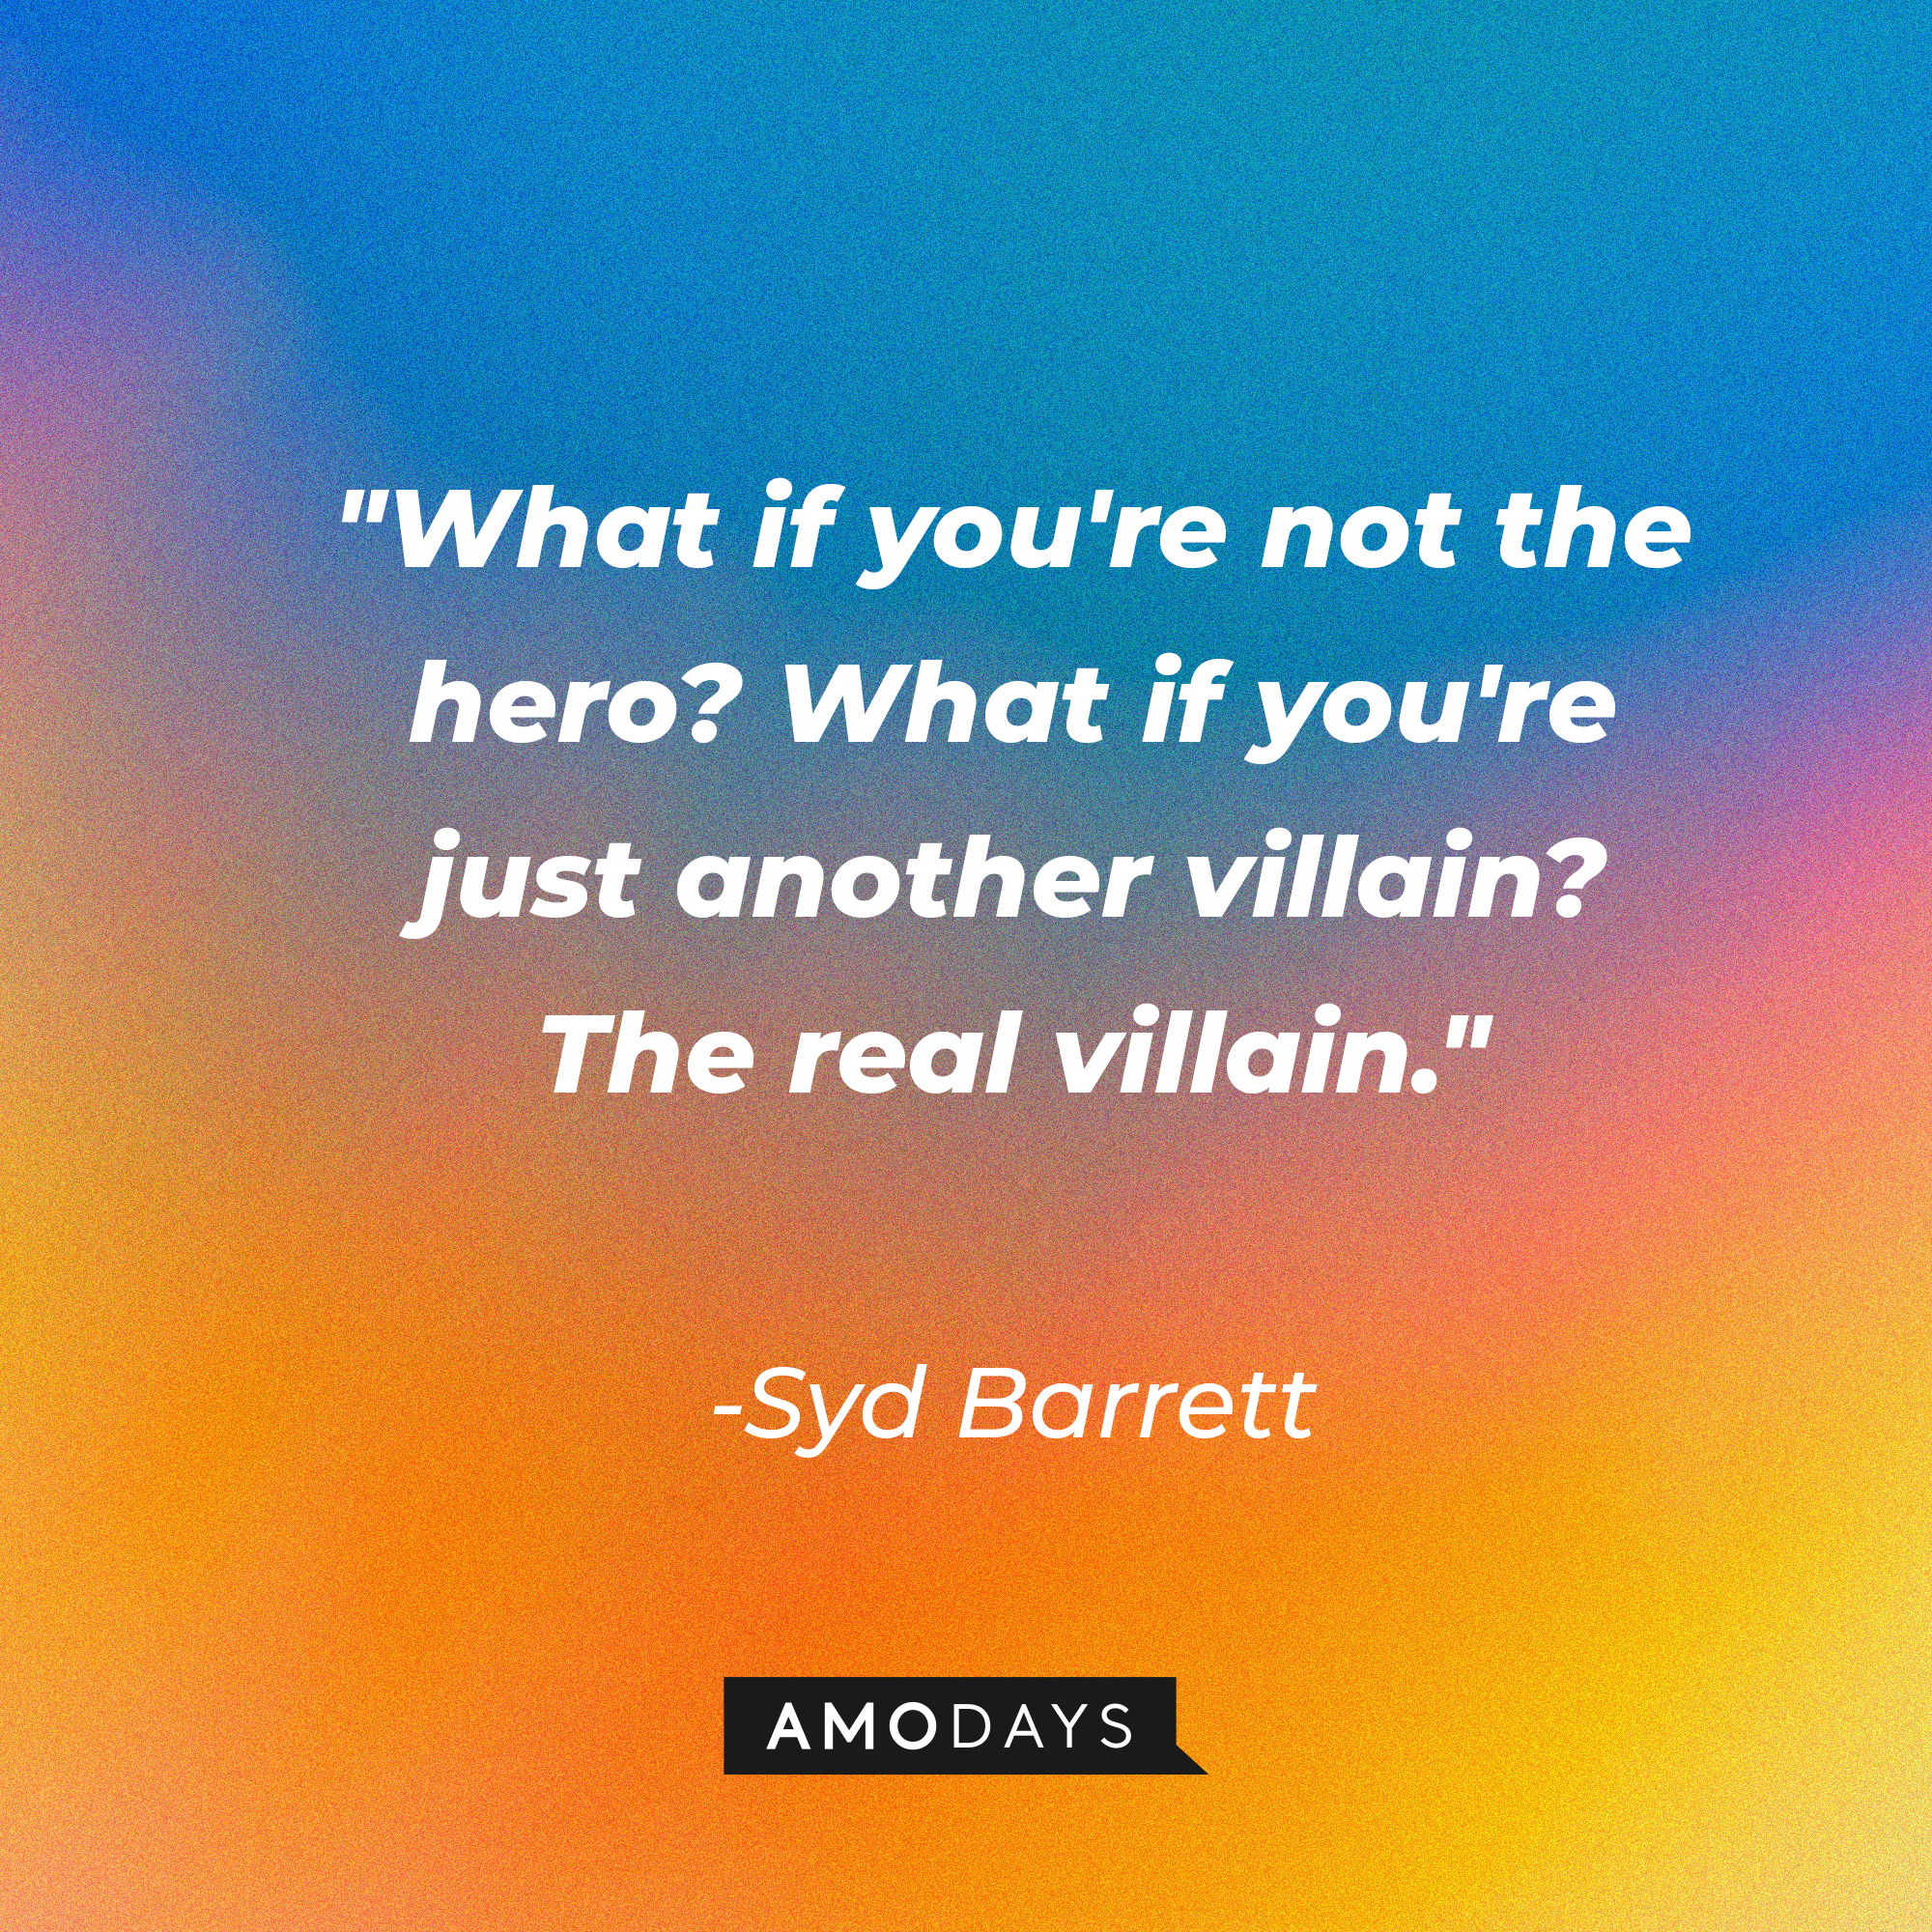 Syd Barrett's quote: "What if you're not the hero? What if you're just another villain? The real villain." | Image: AmoDays